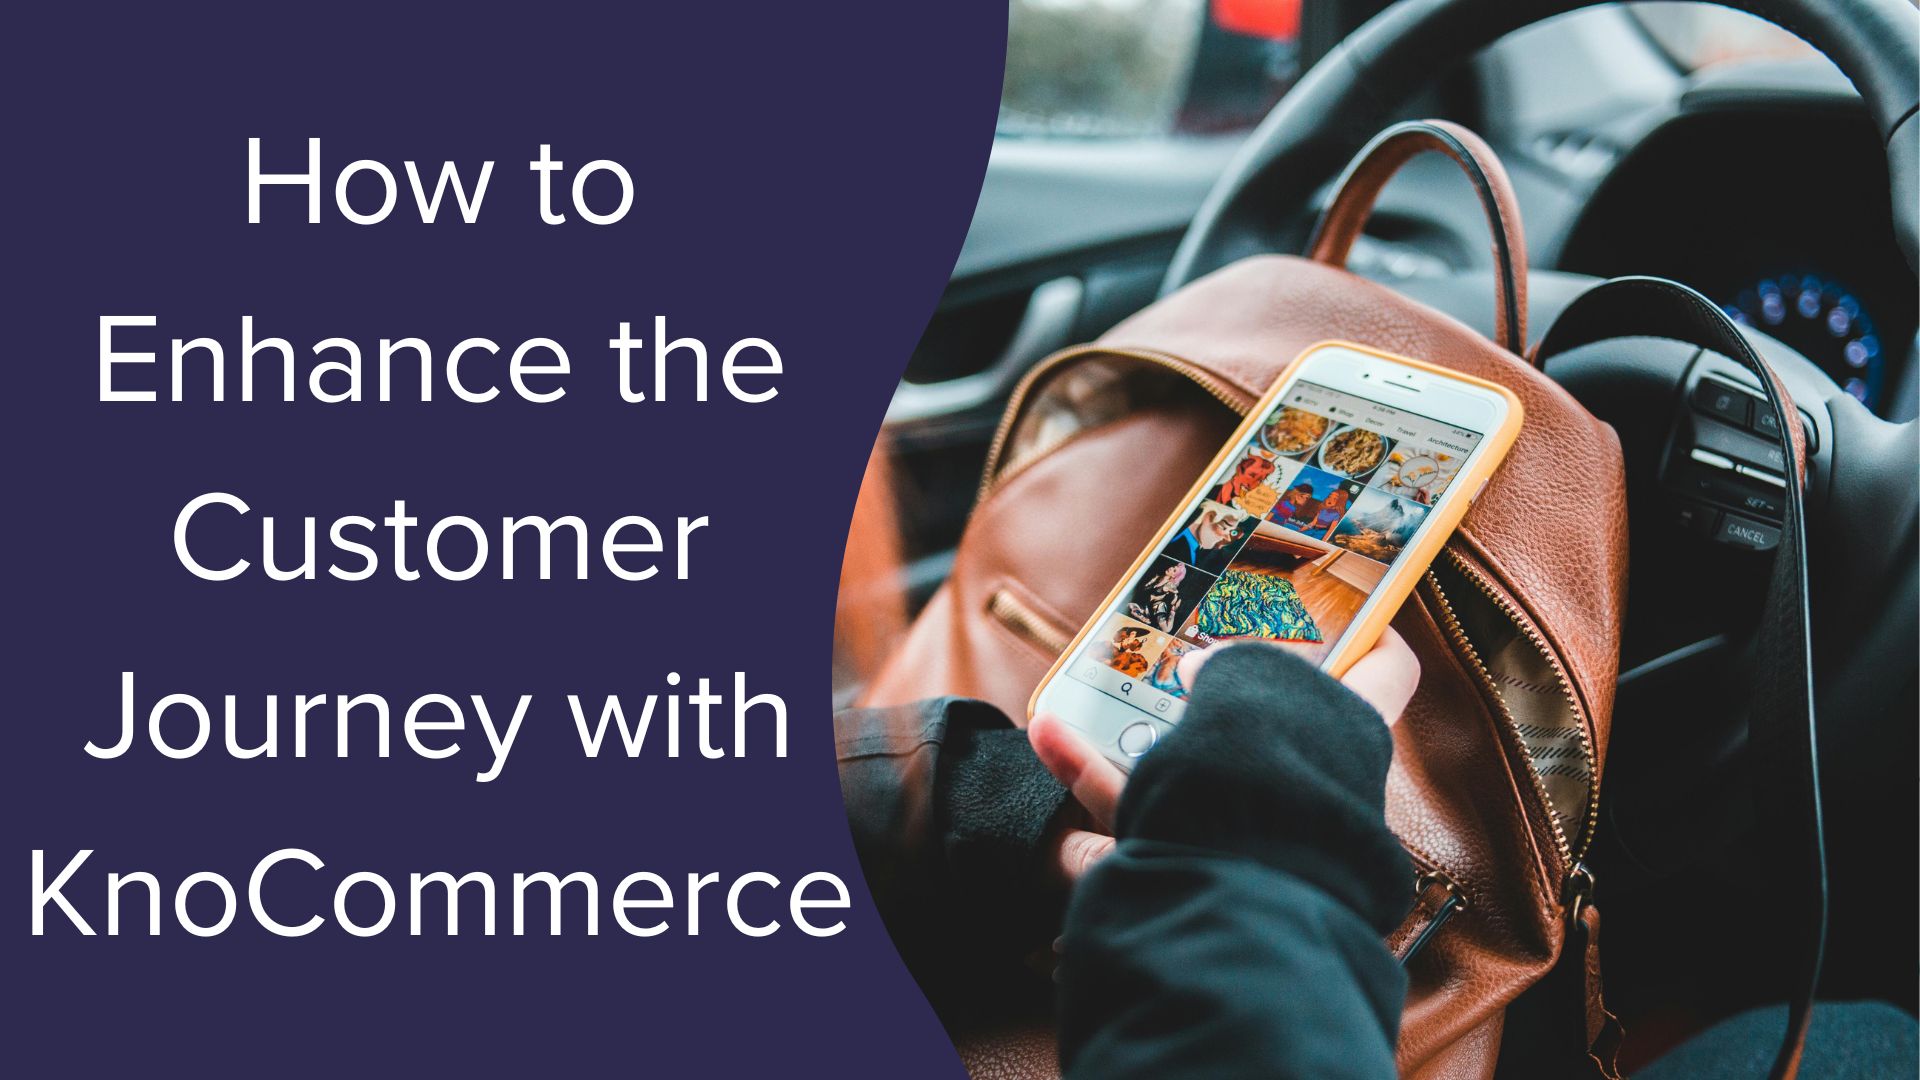 How to Enhance the Customer Journey with KnoCommerce